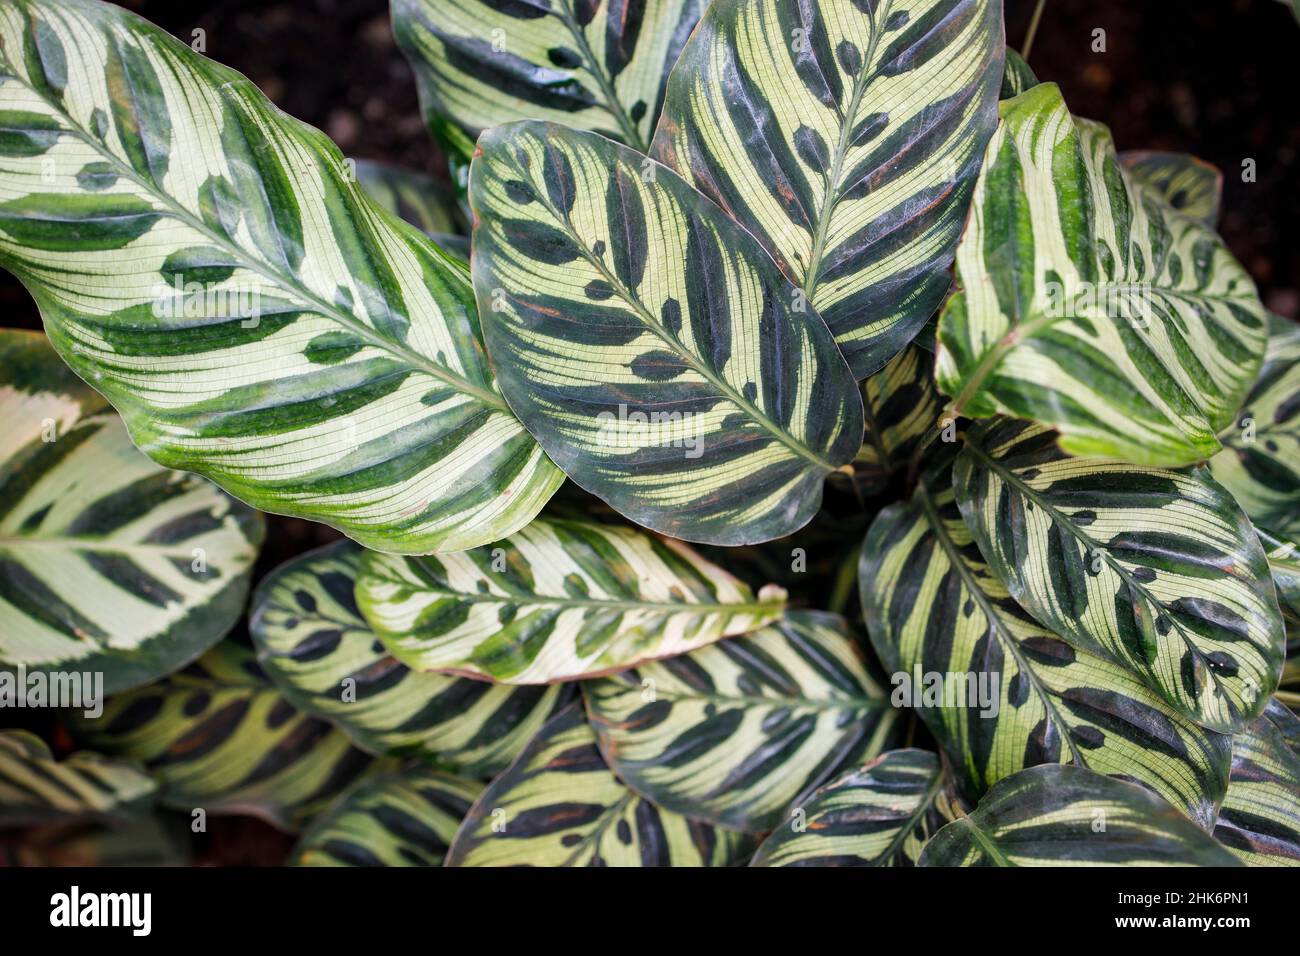 The Peacock plant, also known as Calathea makoyana, is a beautiful tropical houseplant, famed for its beautiful, contrasting green and purplish-red le Stock Photo